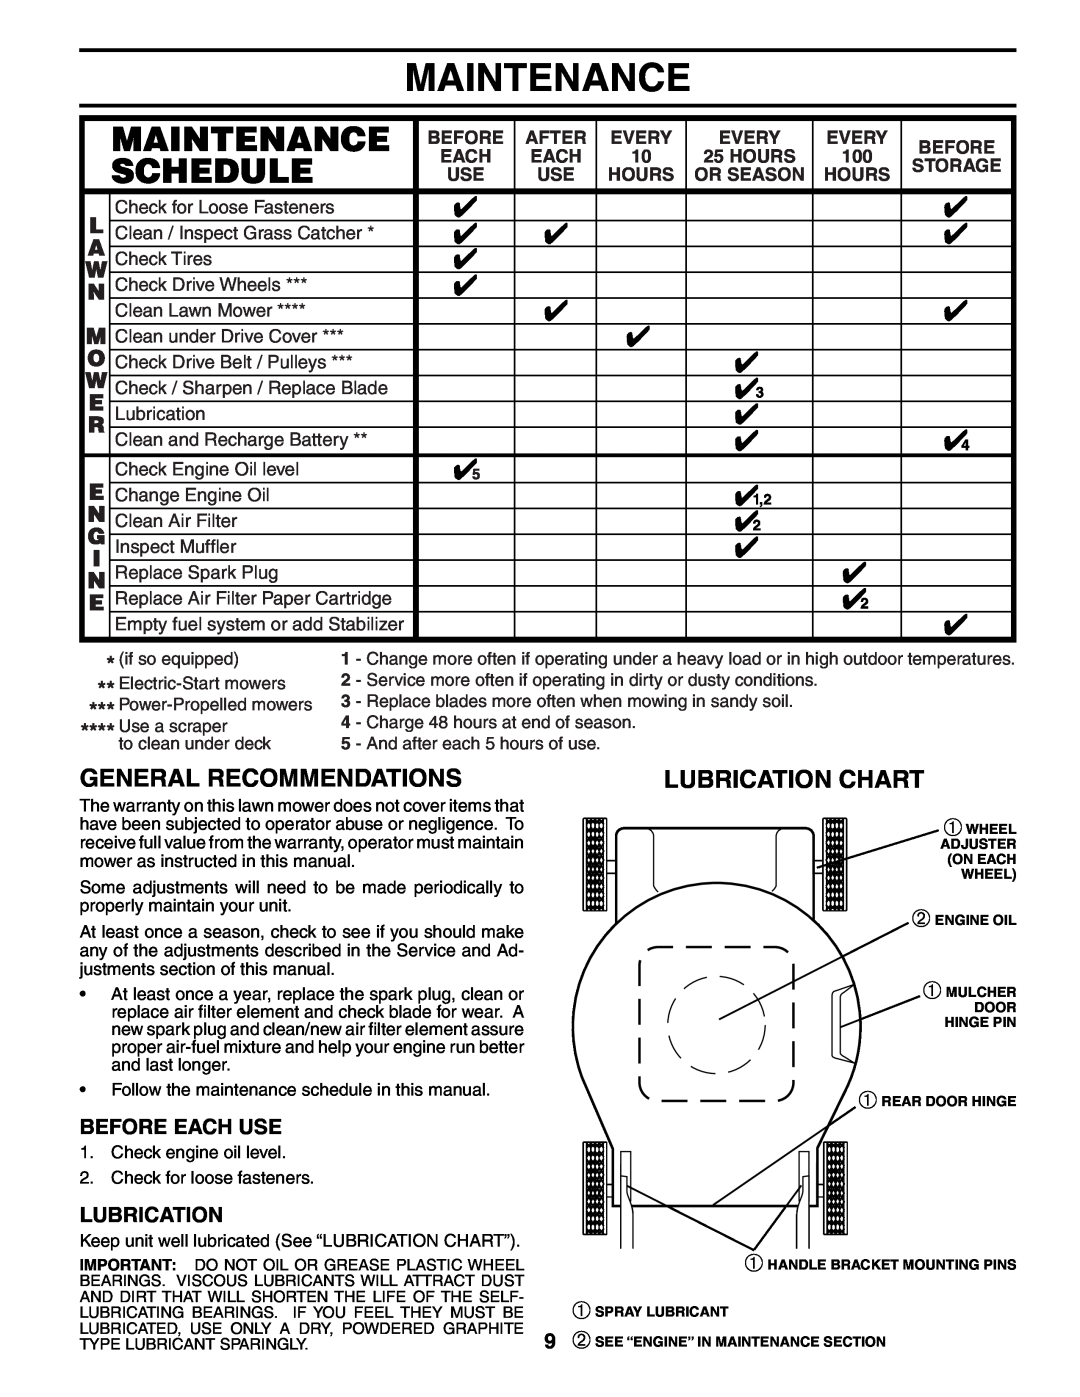 Husqvarna 917.37535 Maintenance, General Recommendations, Lubrication Chart, Before Each Use, After, Every, Storage, Hours 